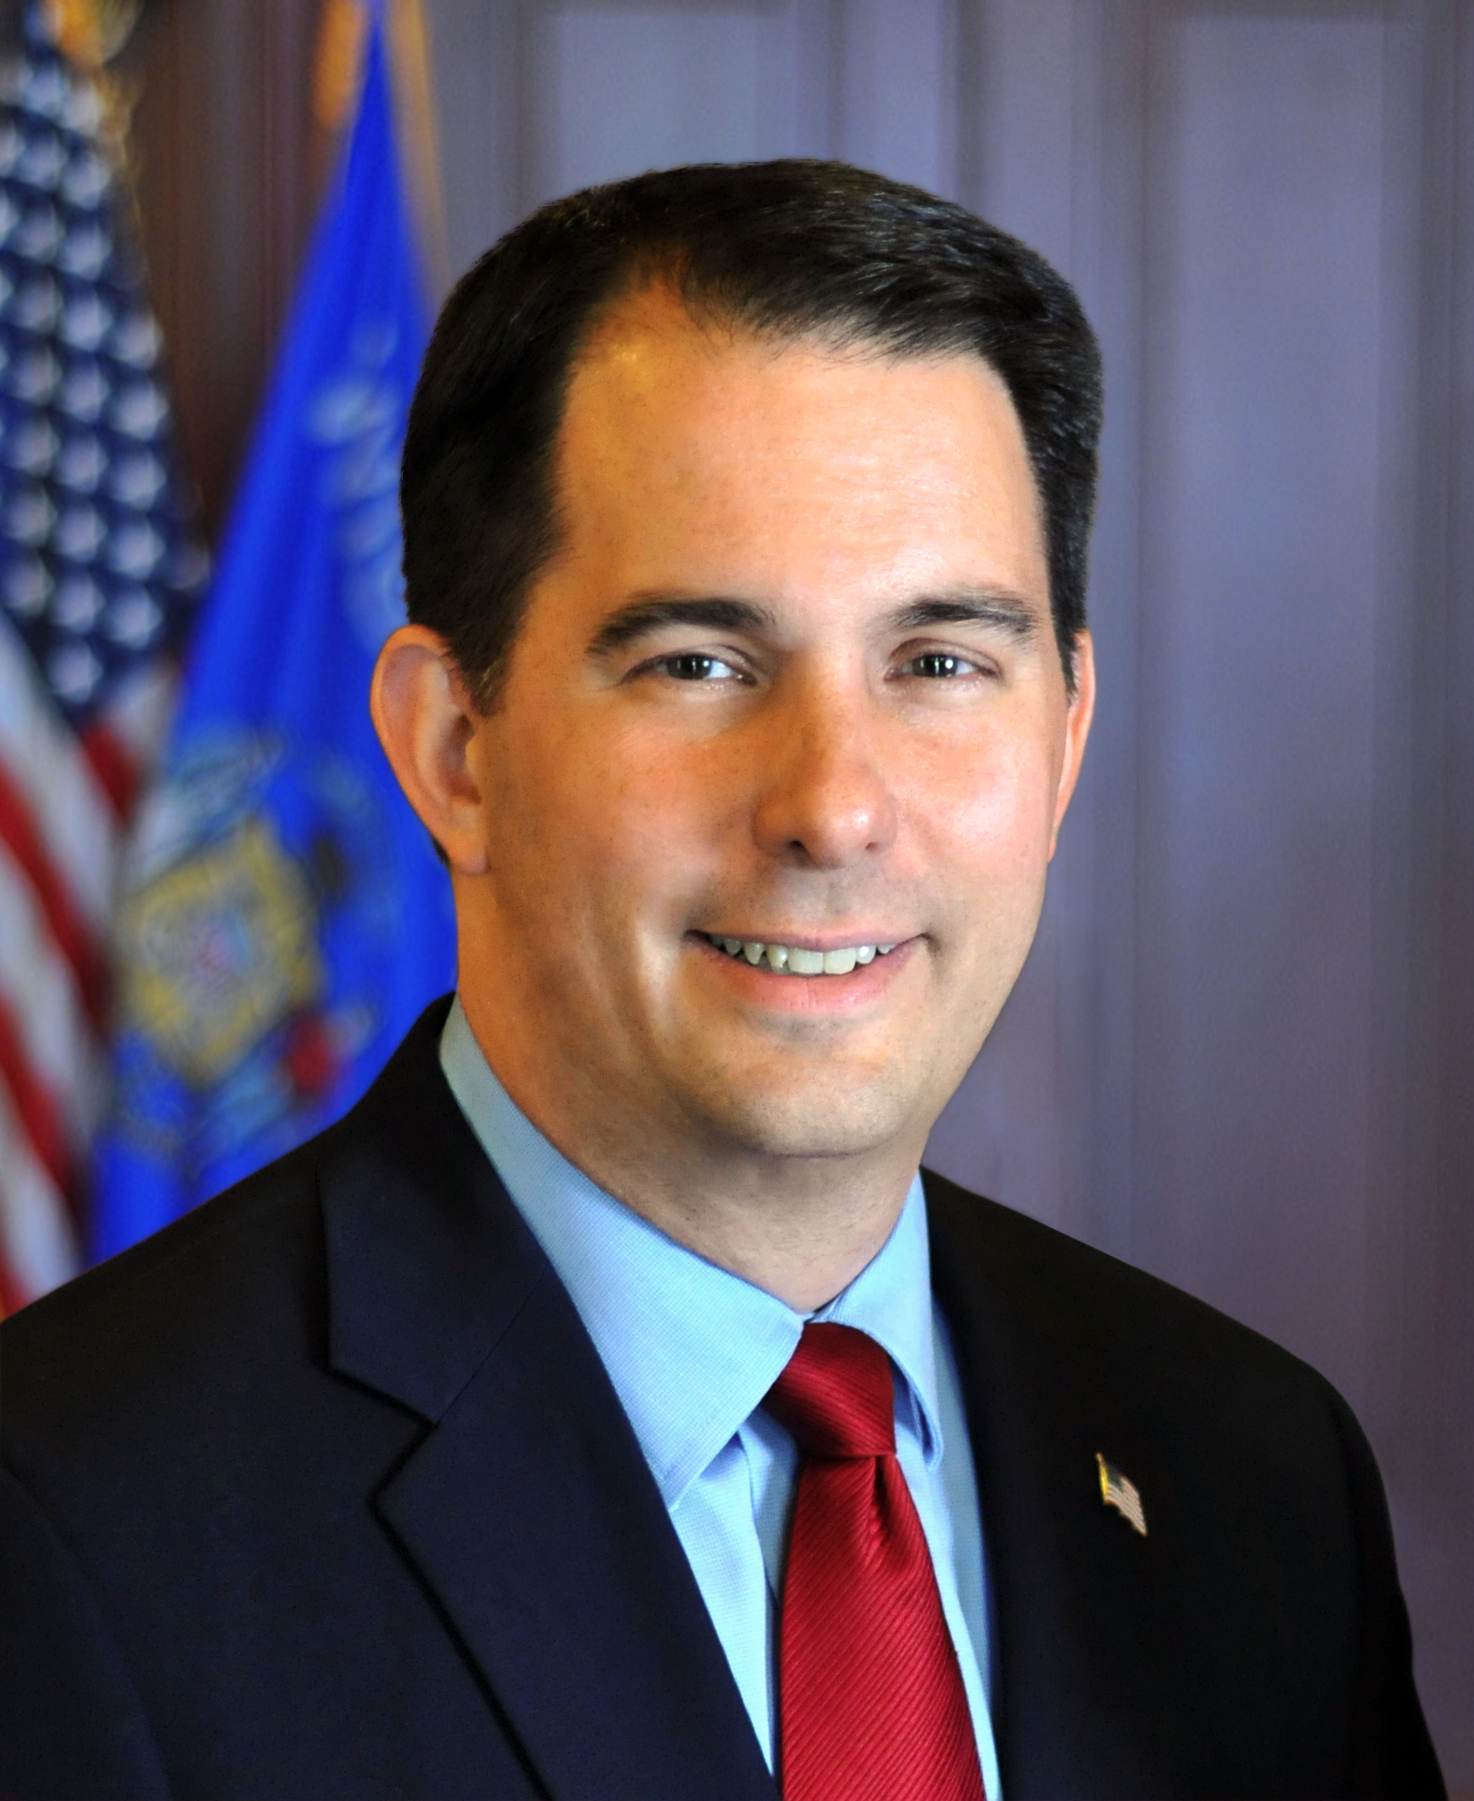 Governor Walker Announces $500,000 Workforce Training Grant to Support Great Lakes Cheese Expansion in Wausau